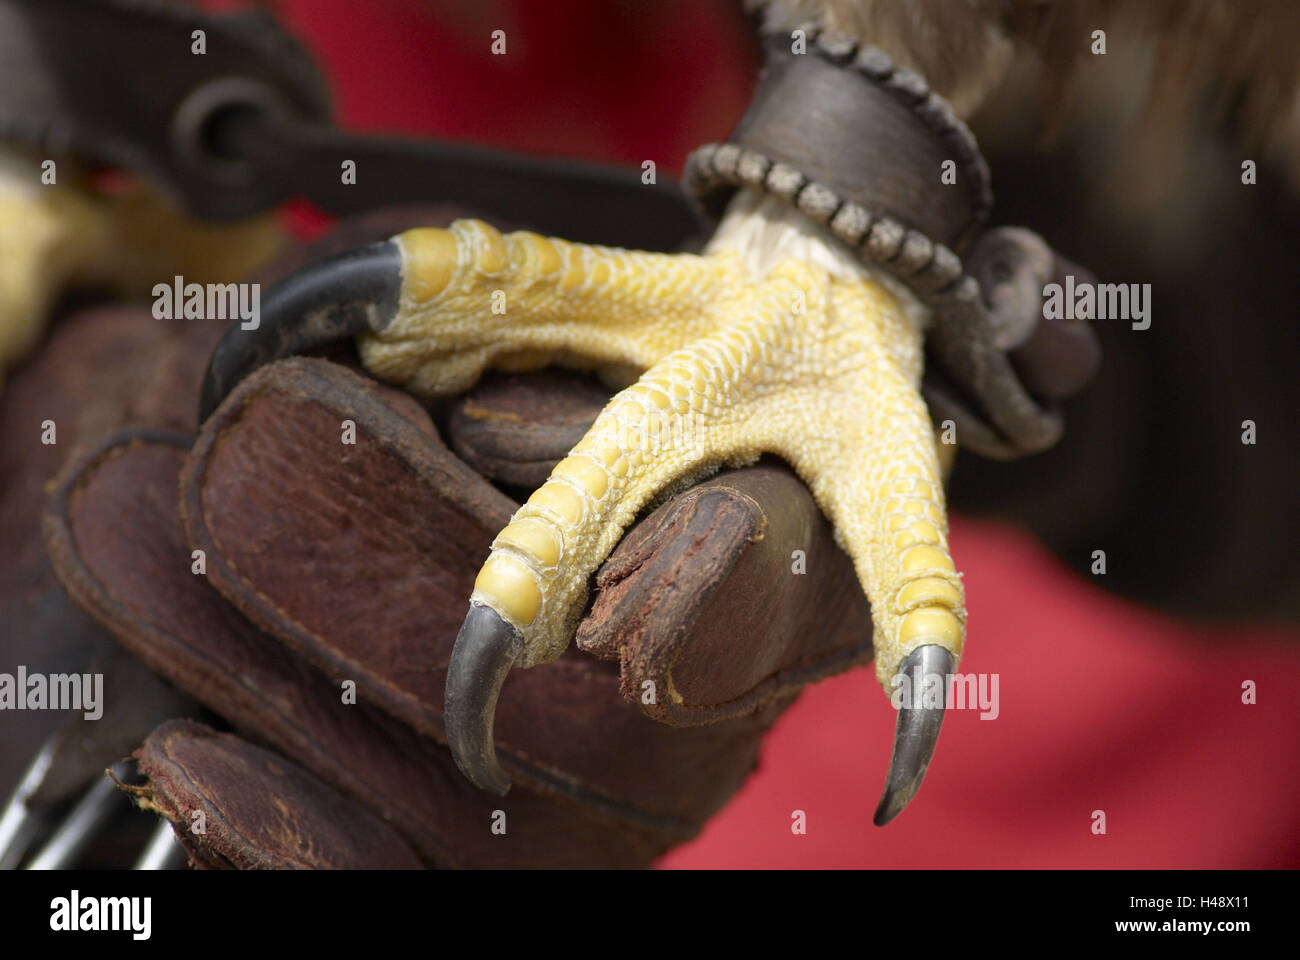 Stone eagle, foot, claws, falconers, leather ball glove, detail, Stock Photo